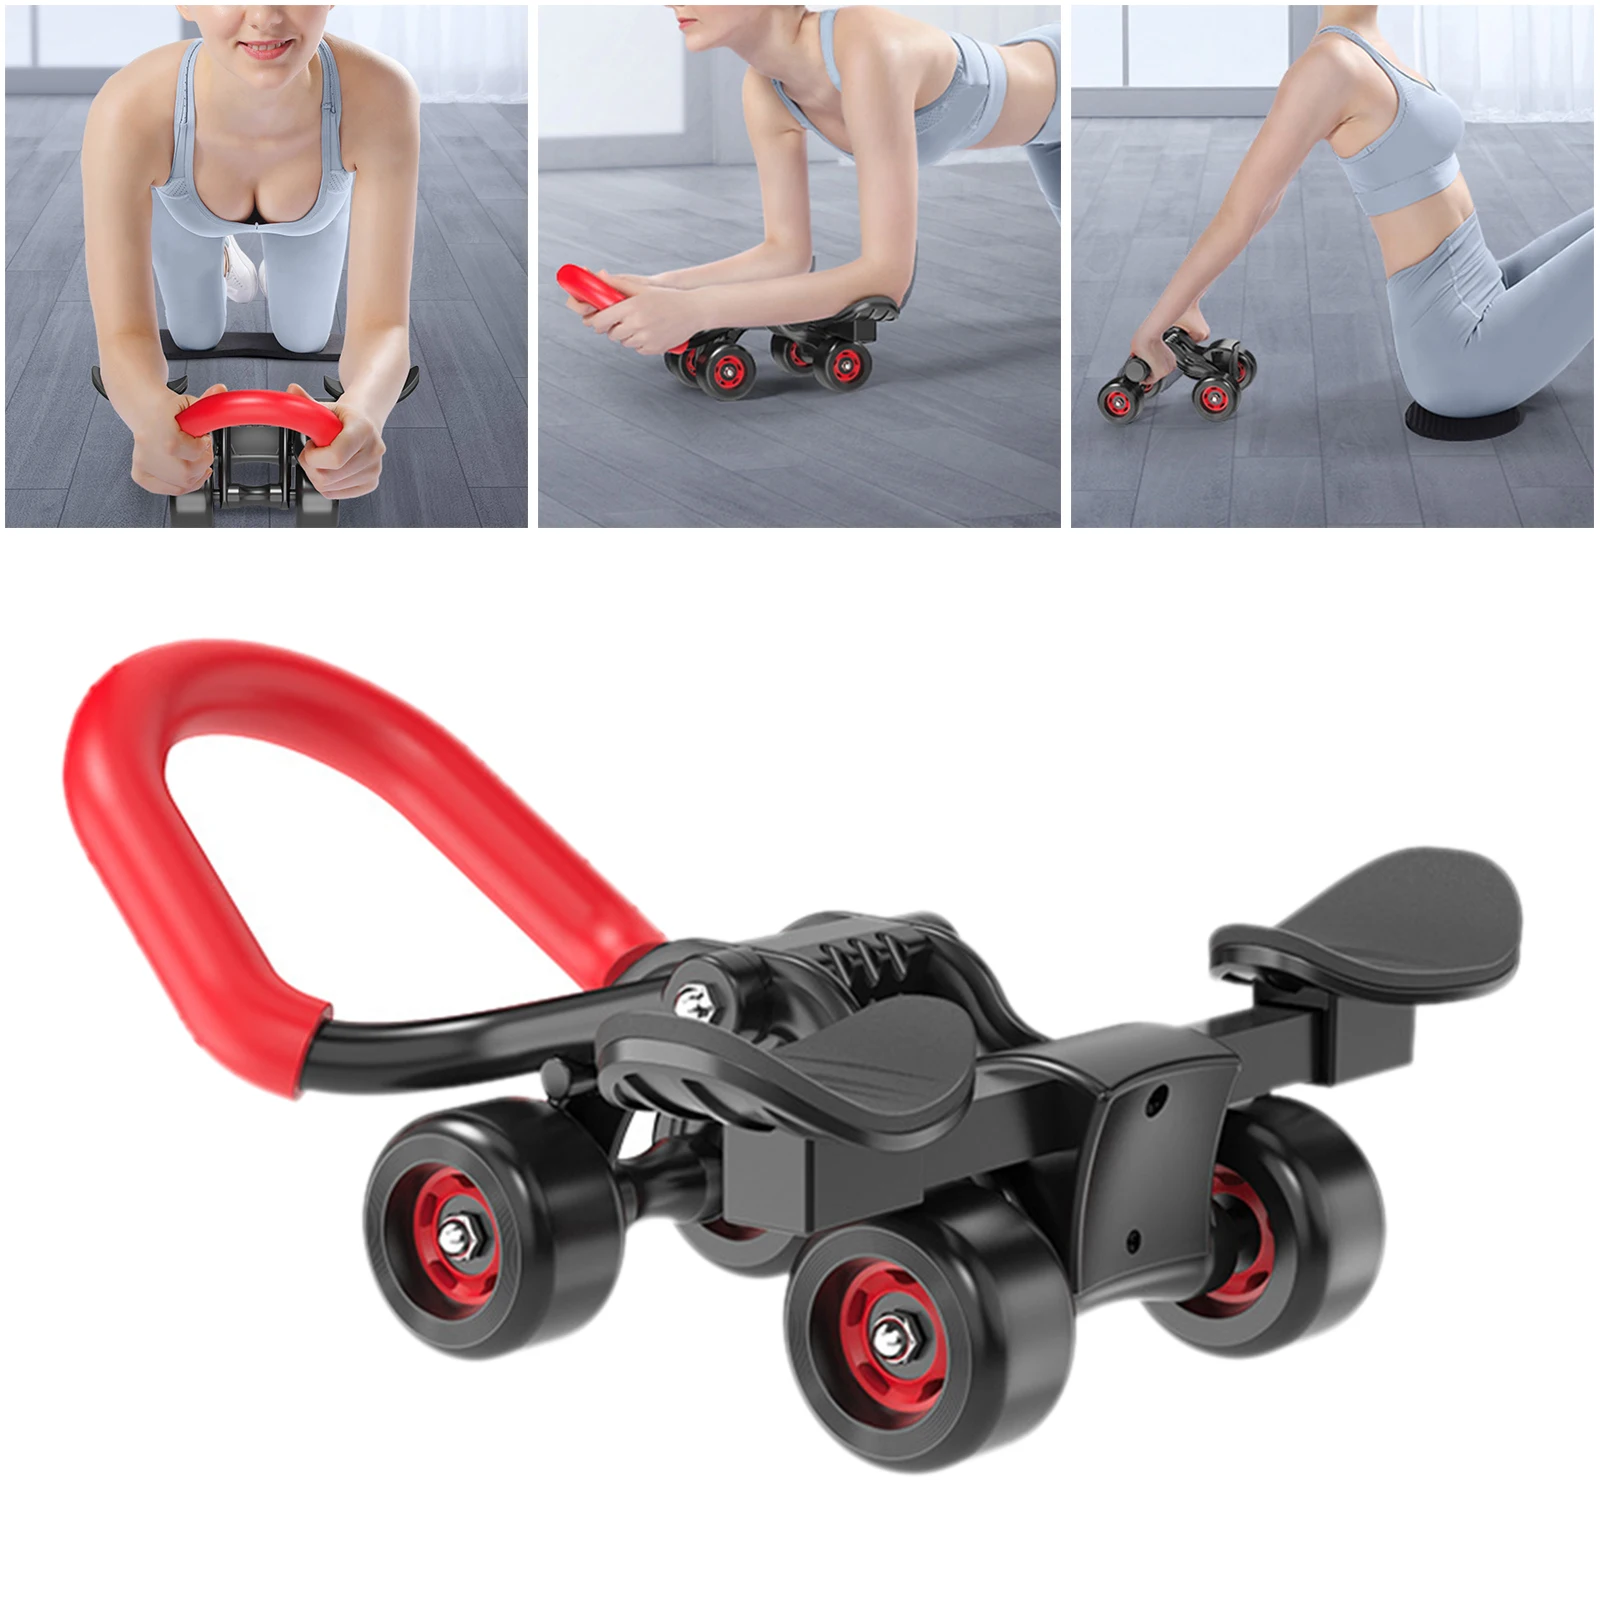 Home Gym Workout Exercise Equipment Core Strength Training Wheel Machine Trainer Waist Belly Shaper Toner Wheels